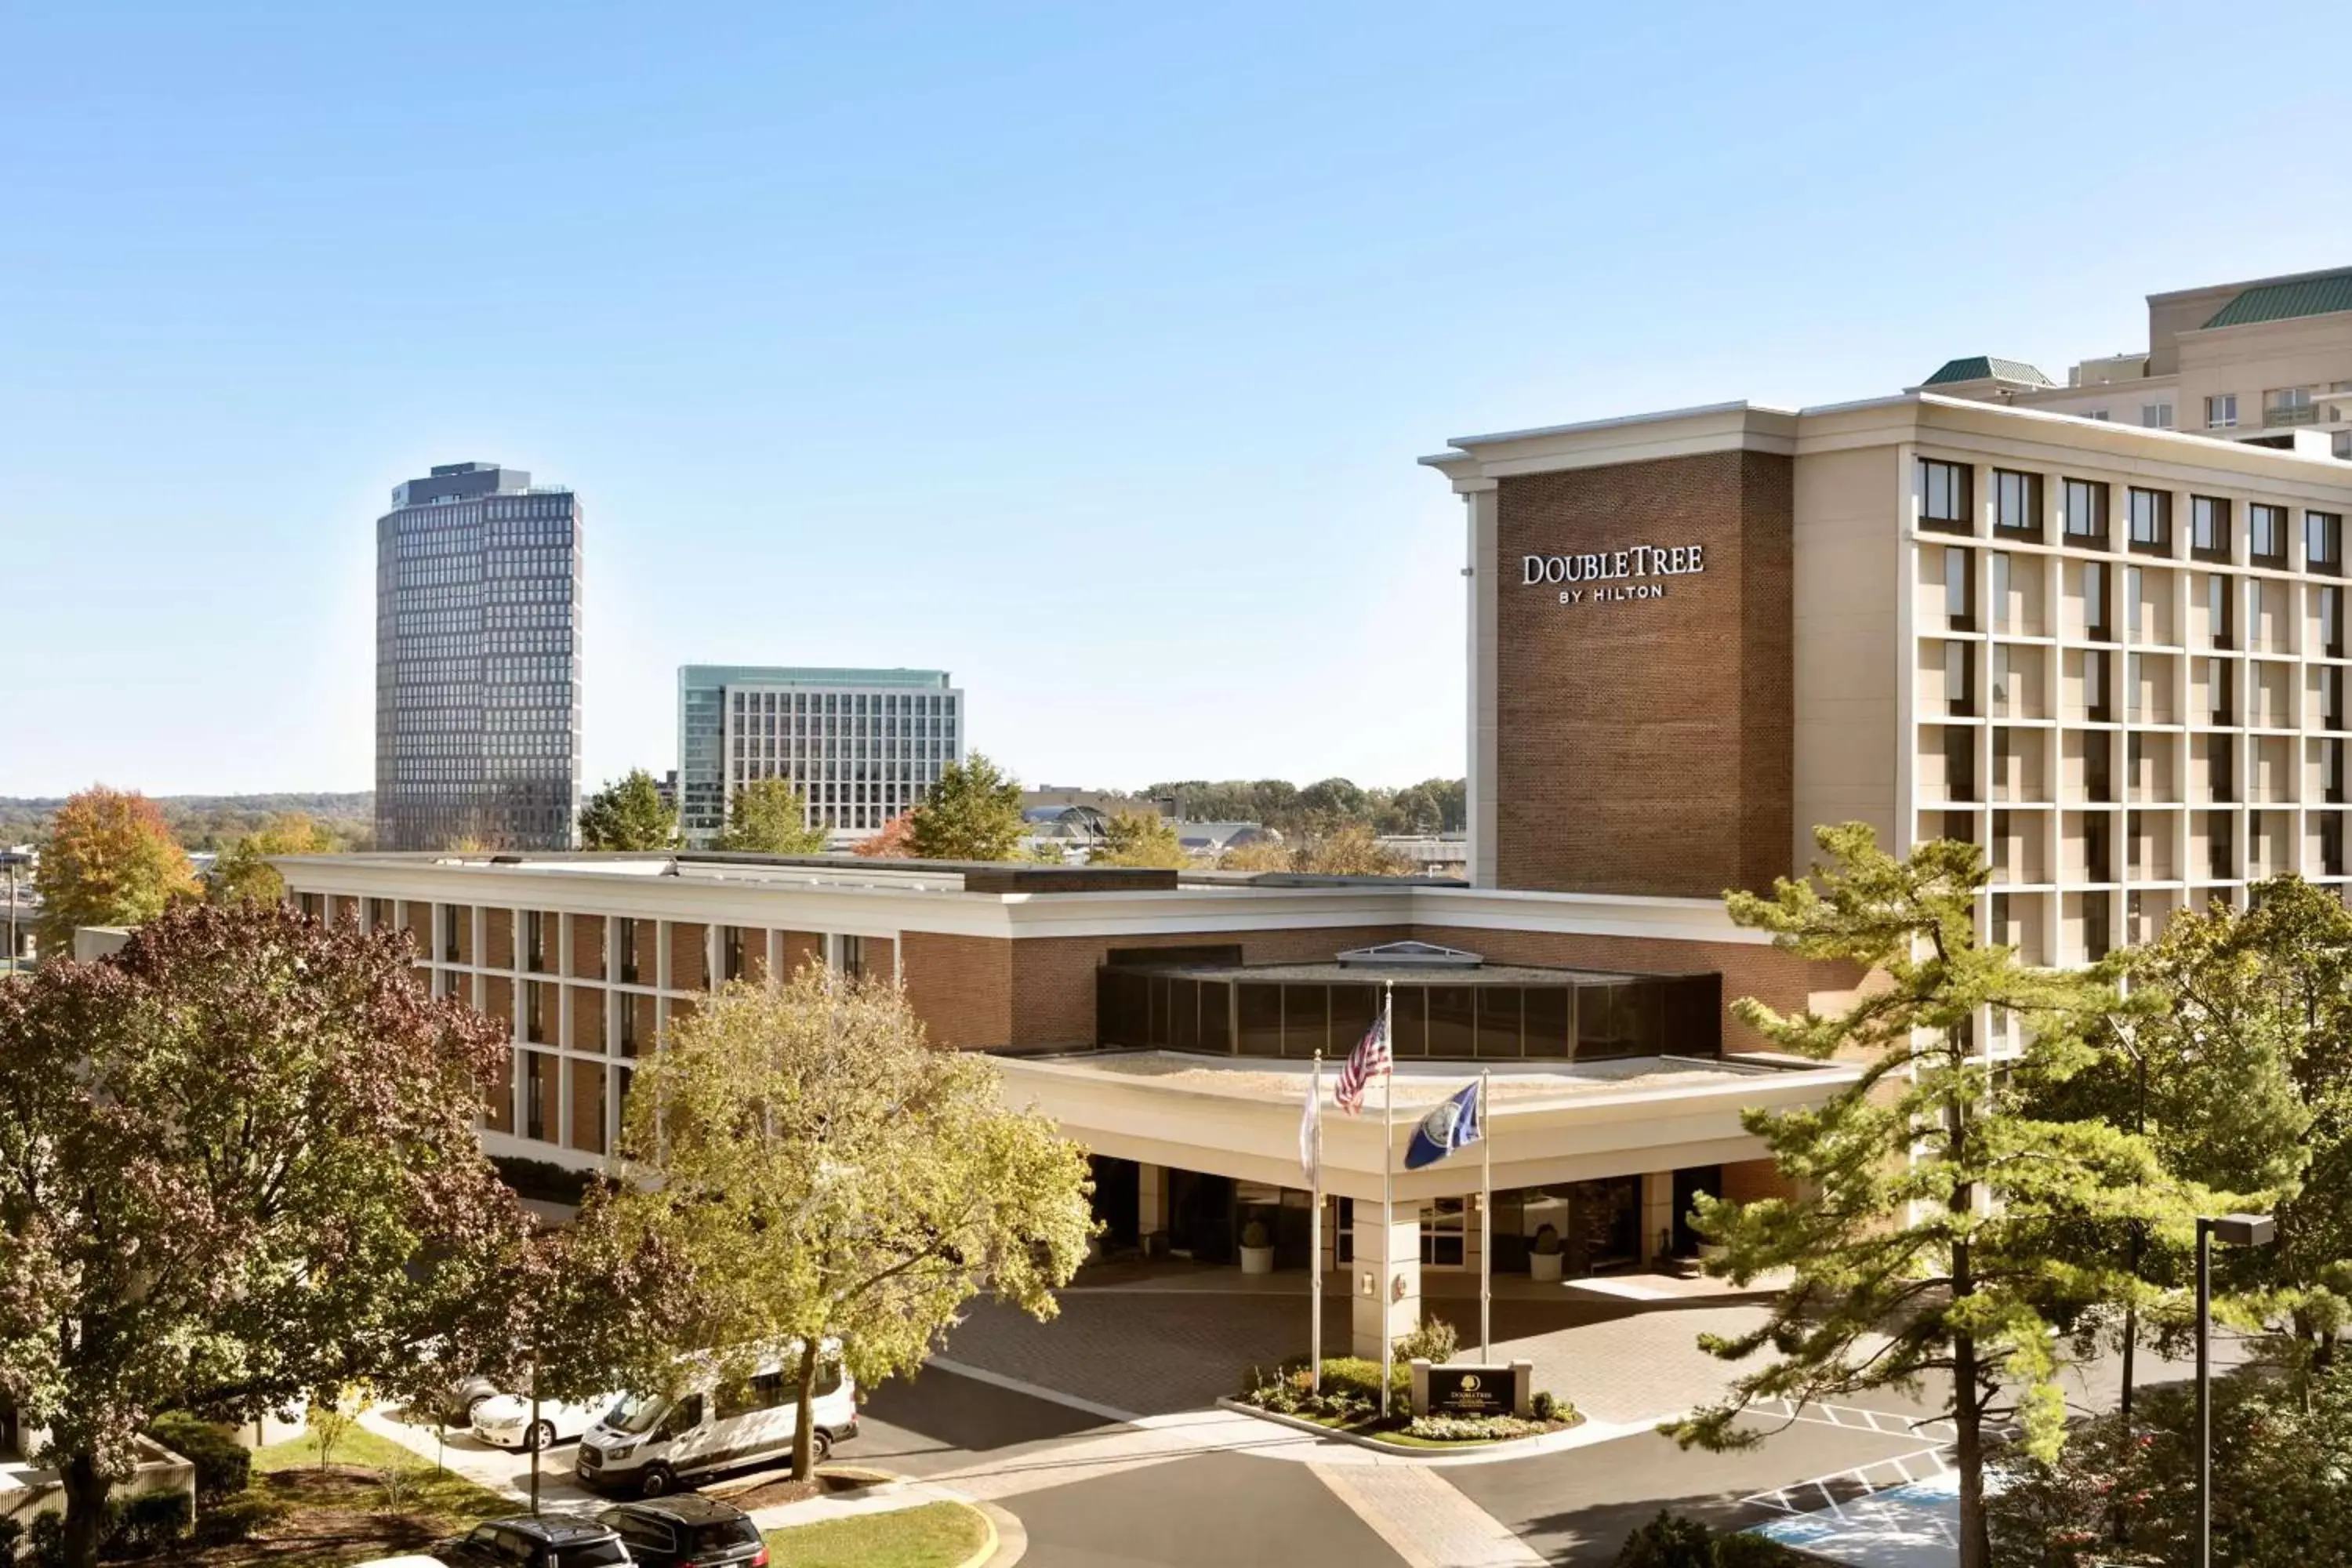 Property building in DoubleTree by Hilton McLean Tysons